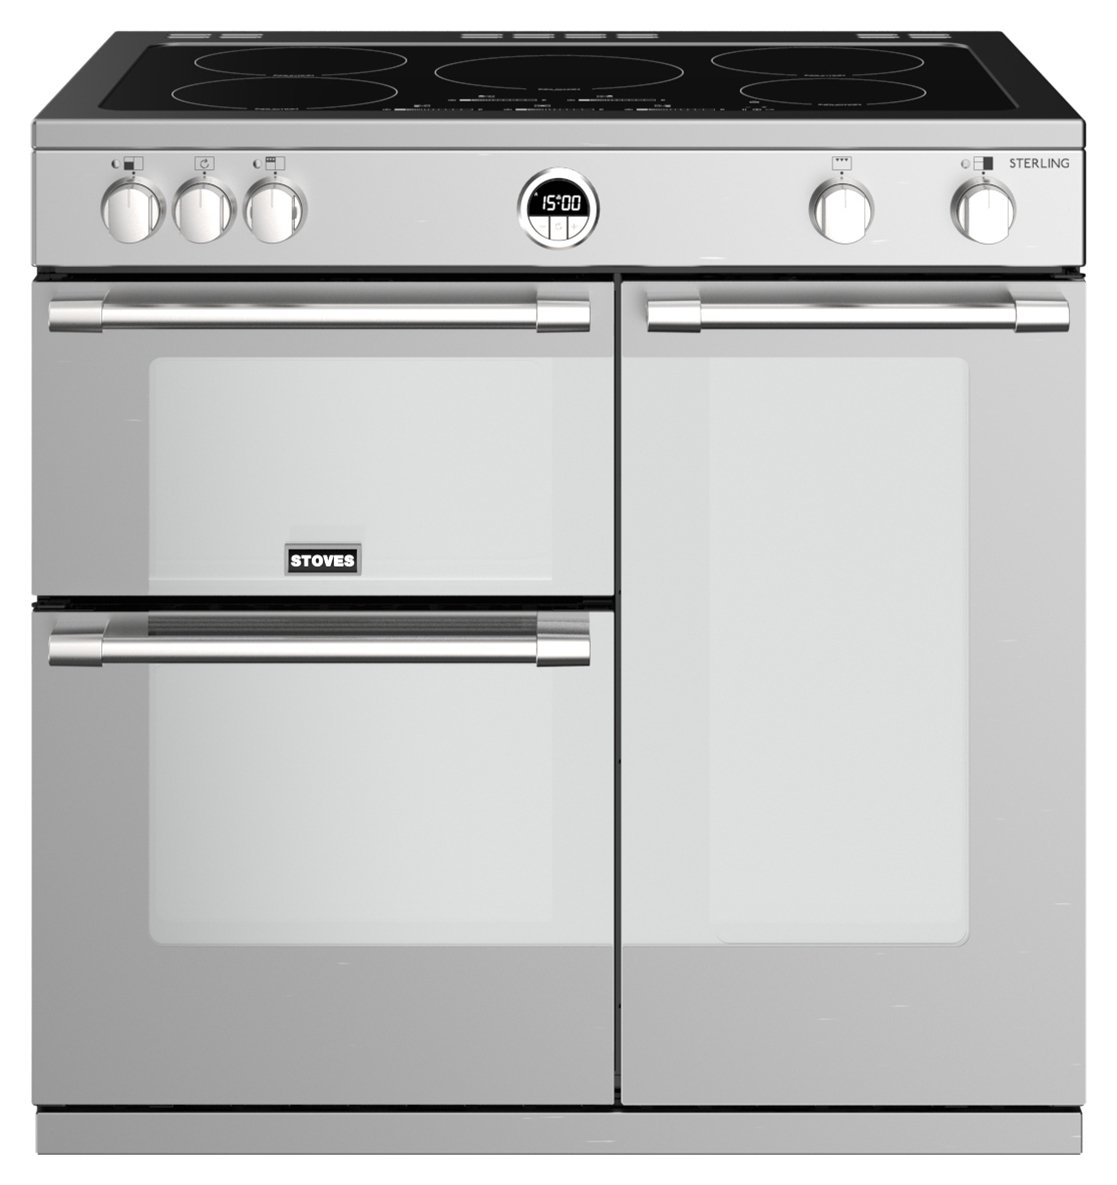 Stoves S900EI 90cm Electric Range Cooker - Stainless Steel